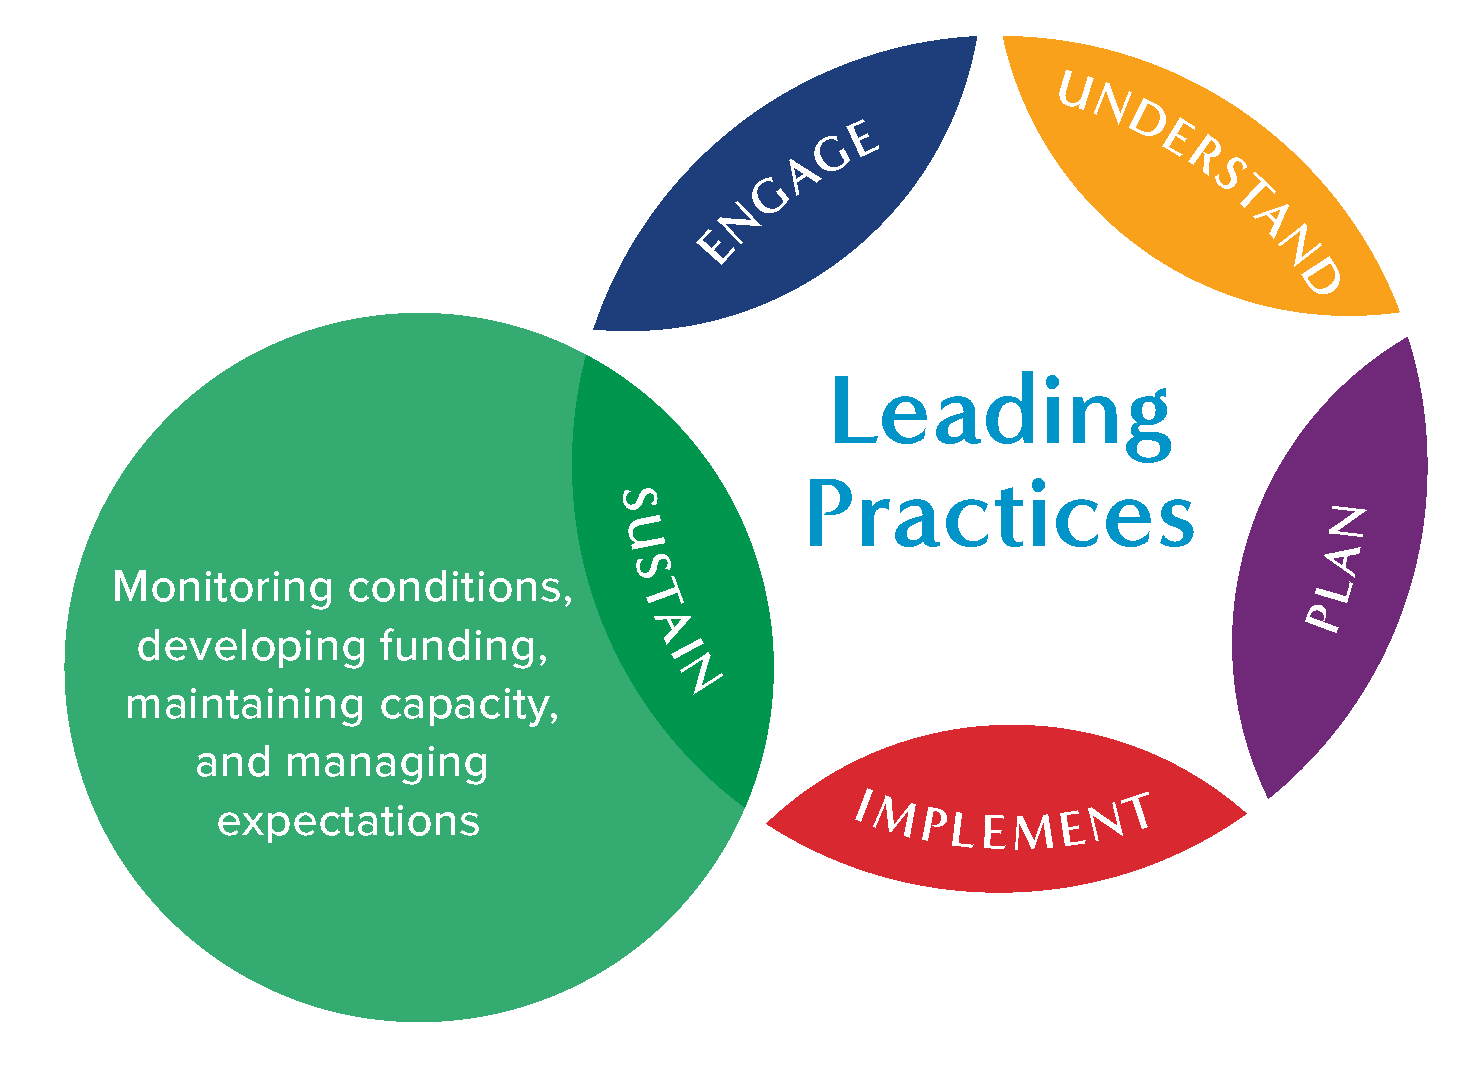 Graphic callout showing "sustain" section and noting that this section includes "monitoring conditions, developing funding, maintaining capacity, and managing expectations"